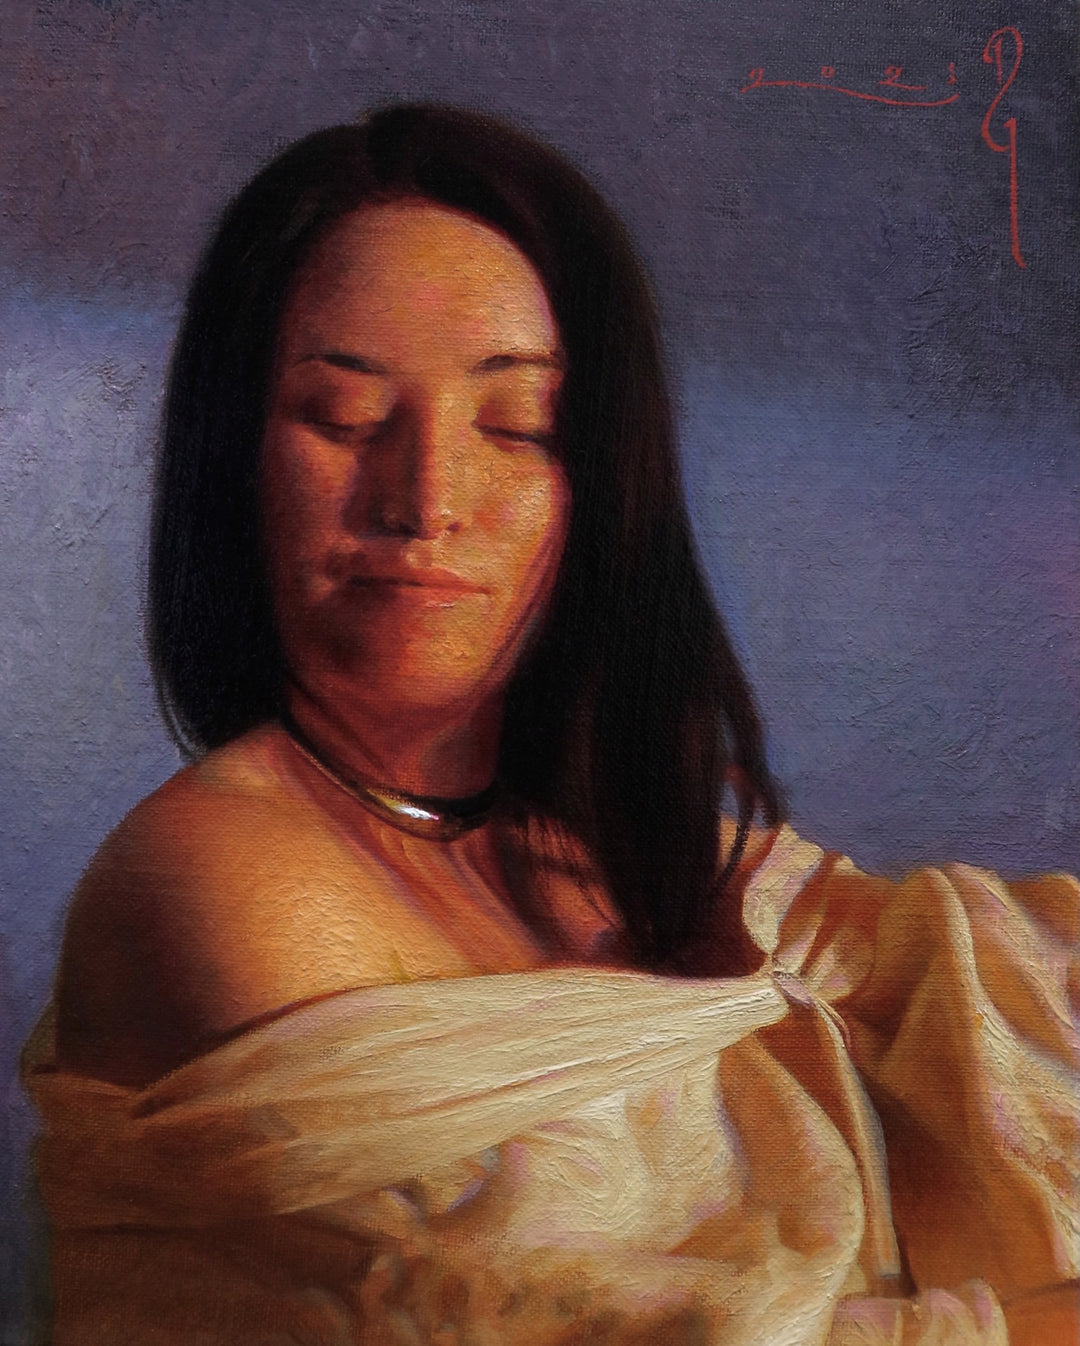 A breathtaking painting by Diego Glazer, capturing the serene beauty of a woman with her eyes closed. This mesmerizing artwork titled "You'll See" by Diego Glazer is meticulously created with oil on linen panel.